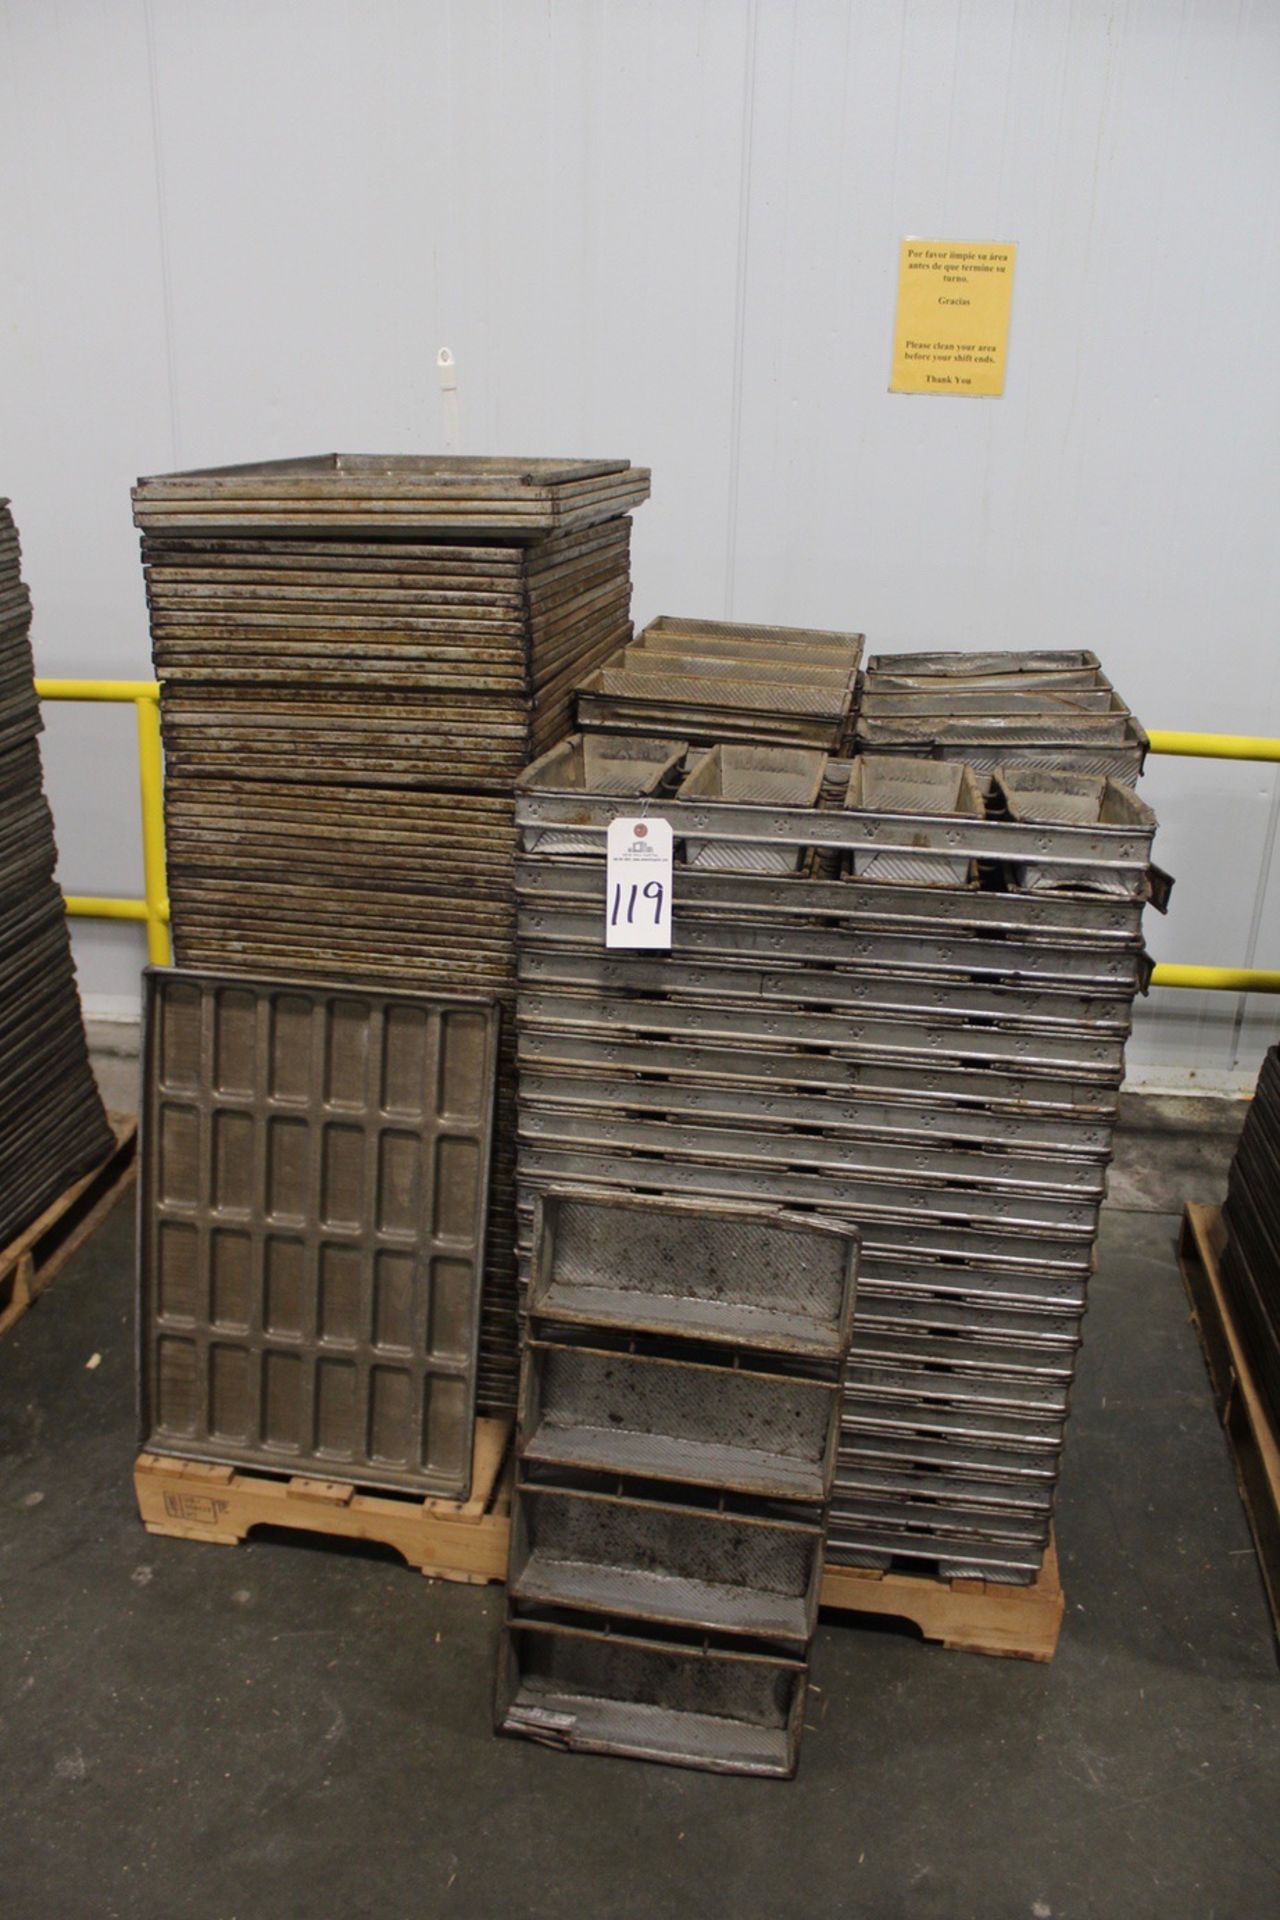 Lot of Baking Pans, (75) 24 ct. 5.5" X 2", (58) 4 Strap Loaf Pans 5.5" X 13" X 2.5" | Rigging a